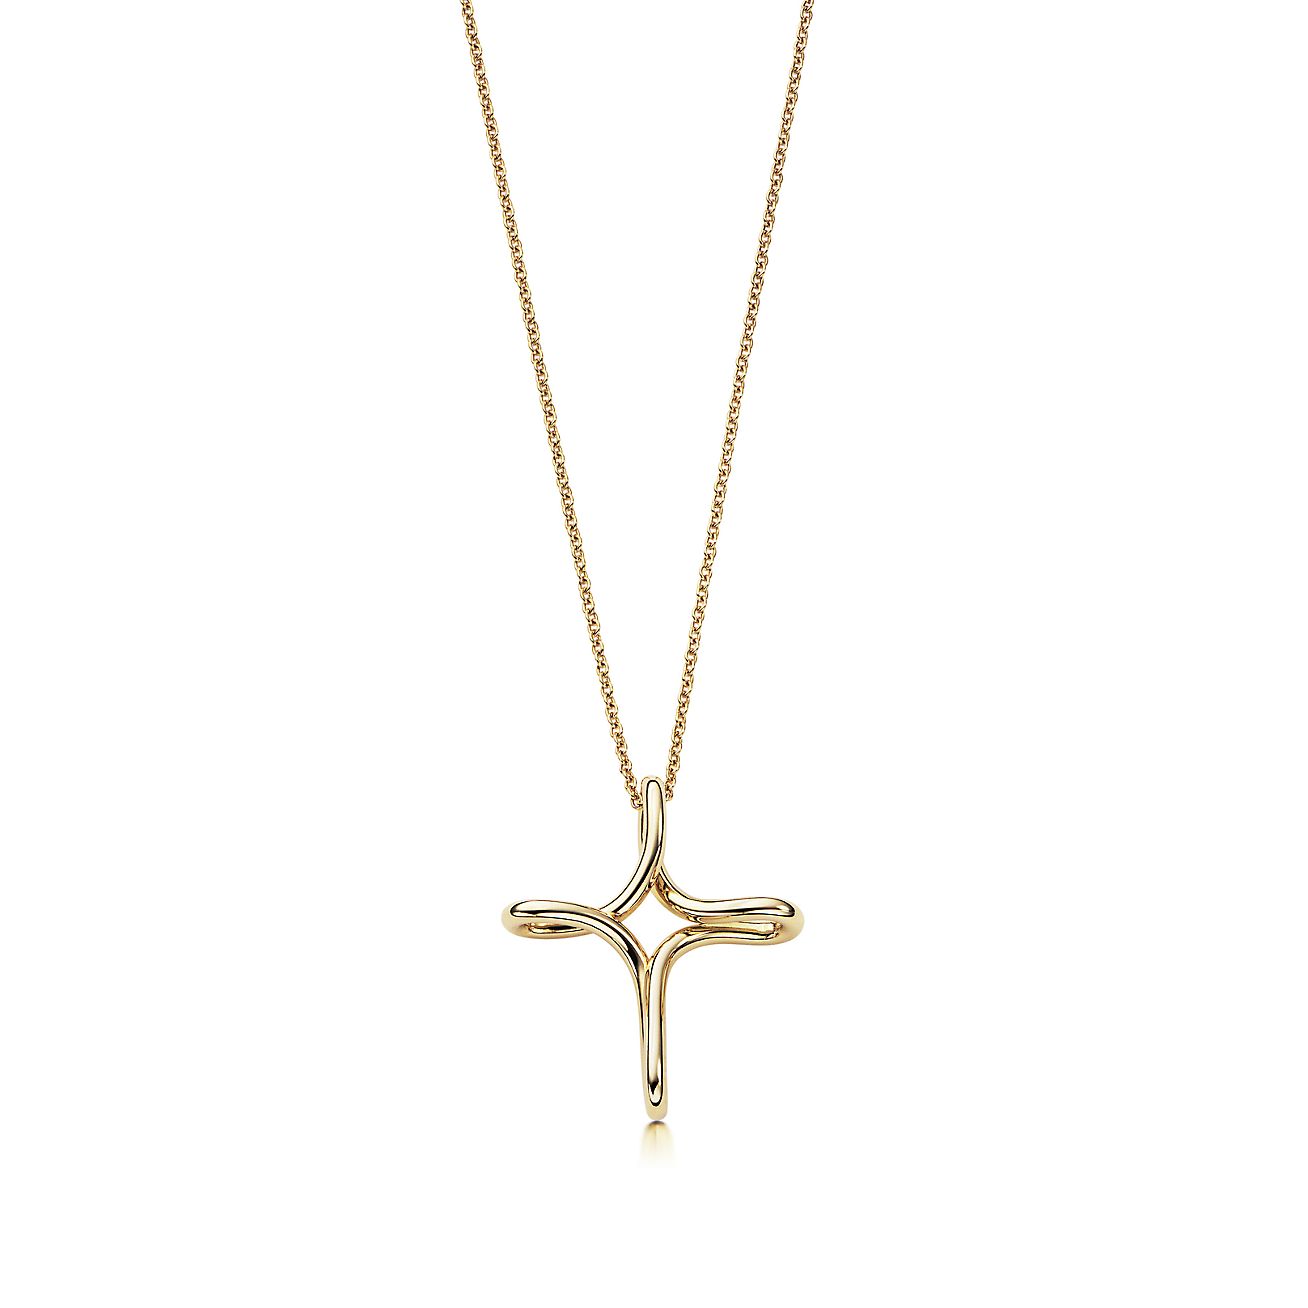 14K Yellow Gold Infinity Cross Pendant Necklace with Chain | Best Buy Canada